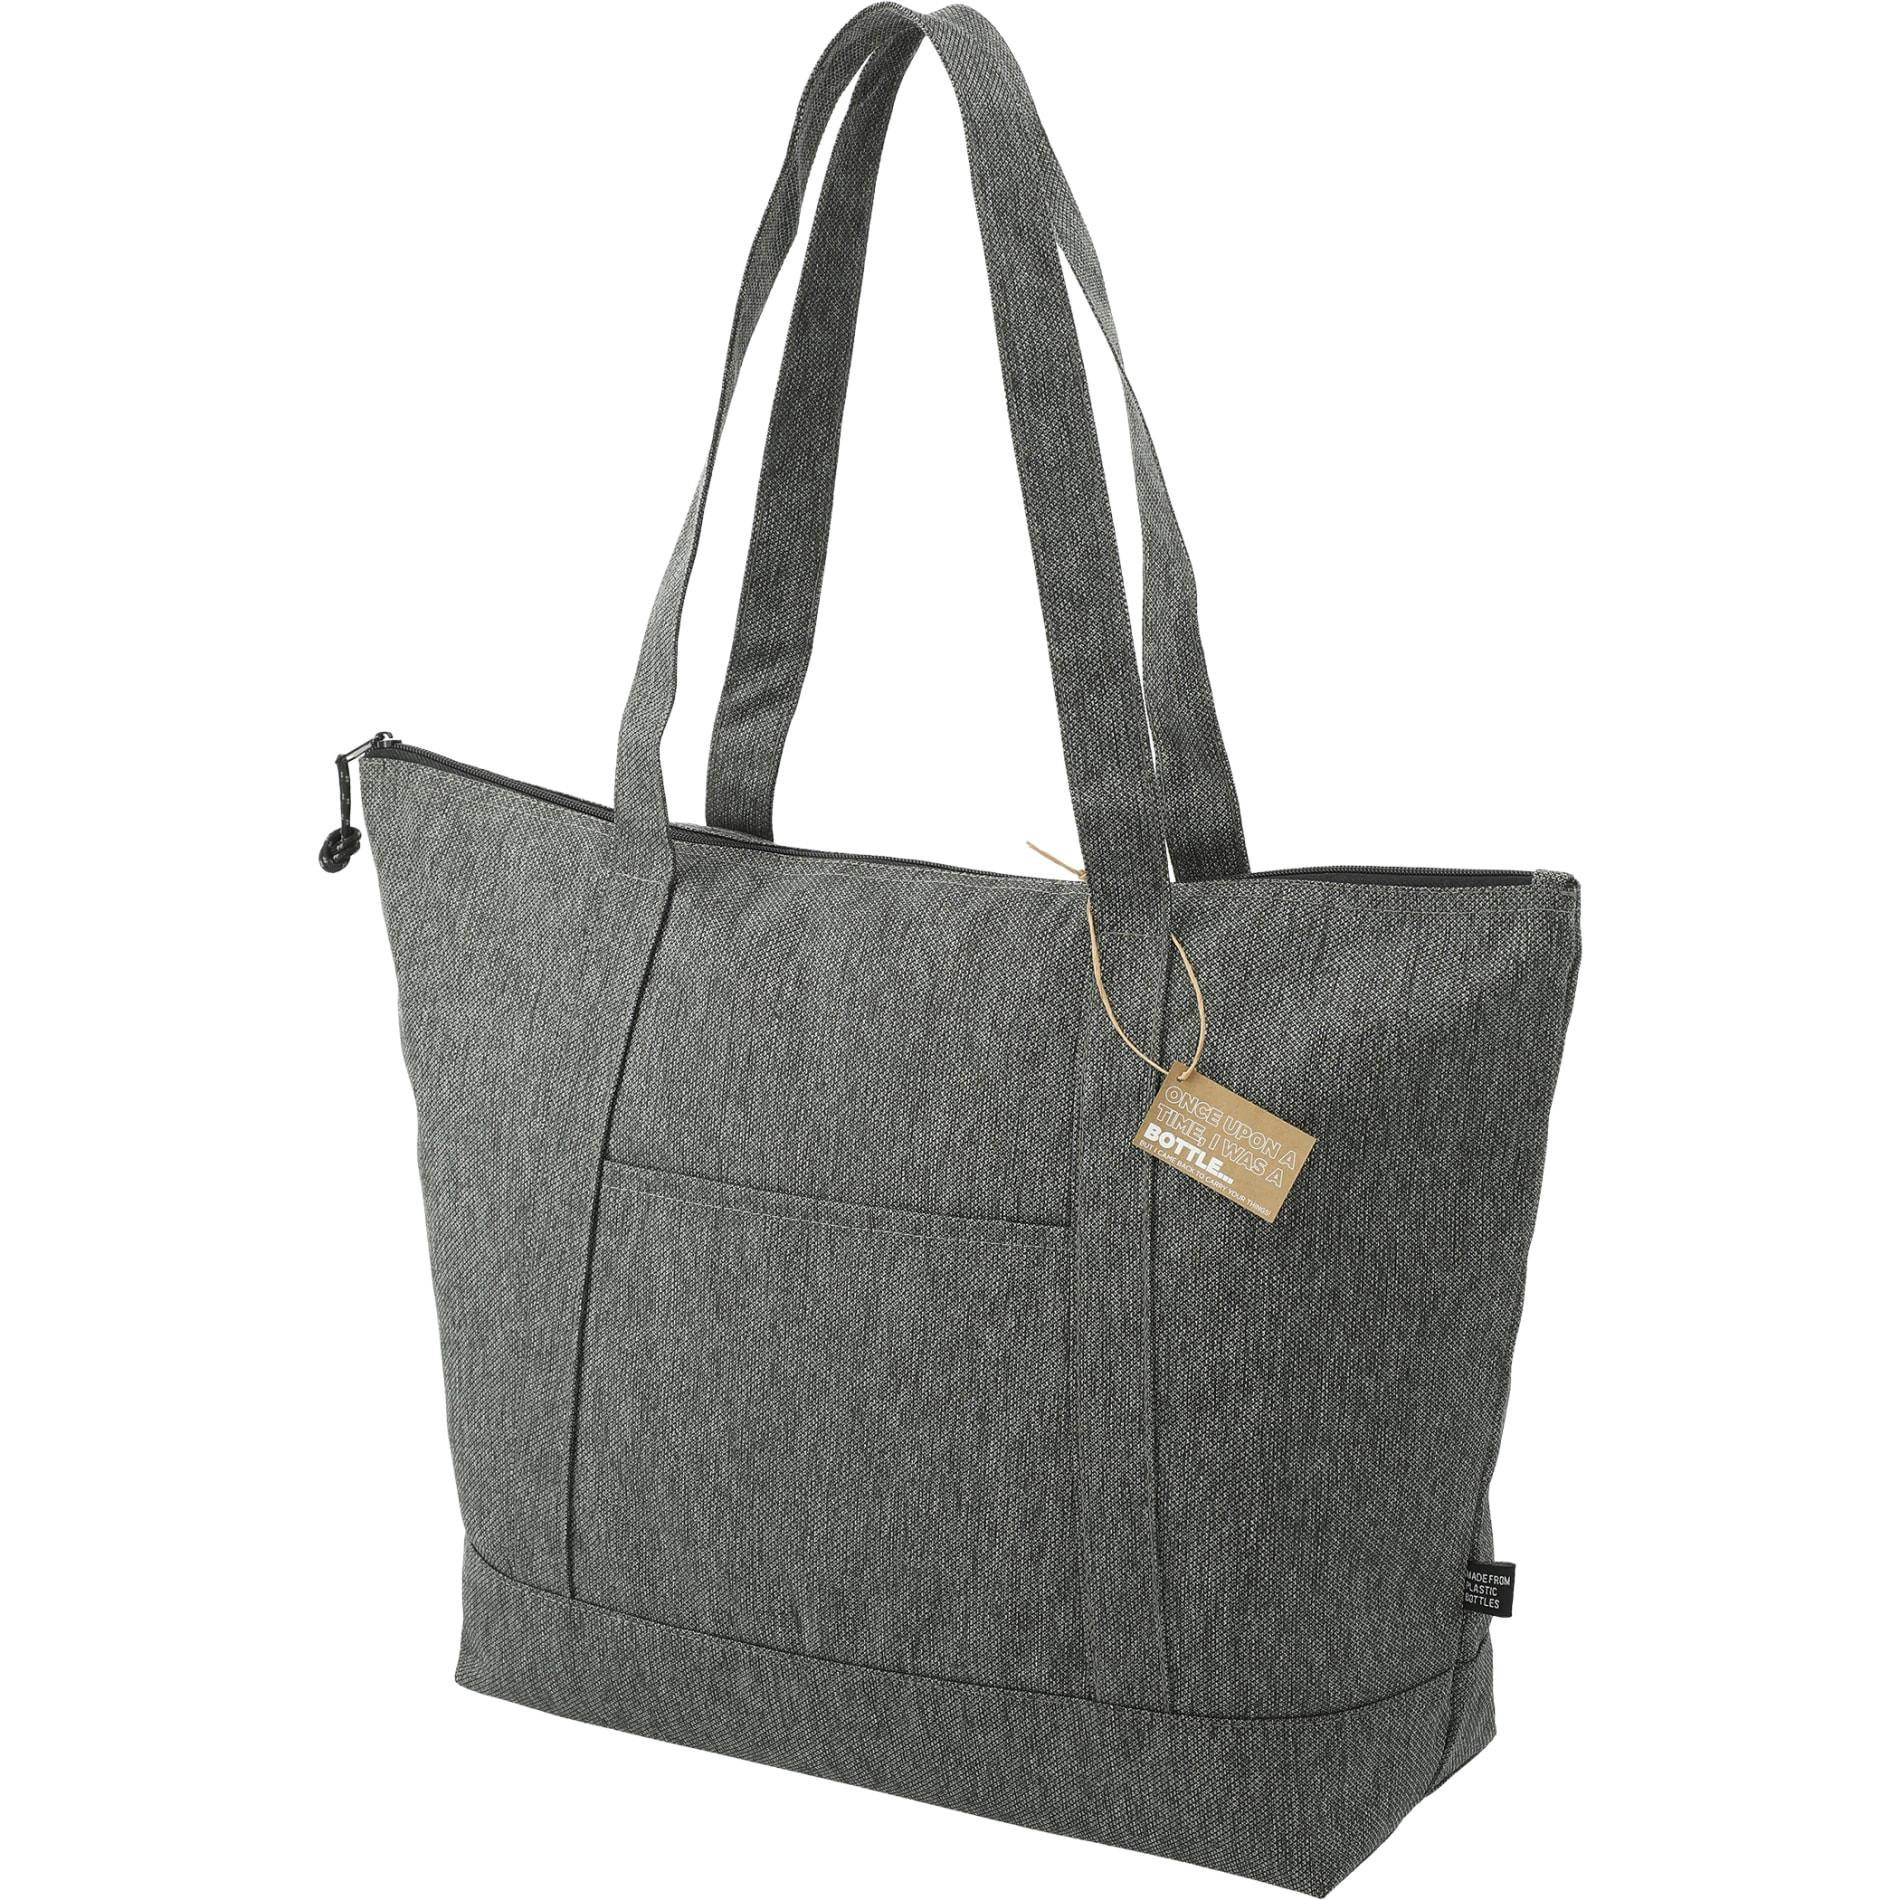 Vila Recycled Boat Tote - additional Image 1